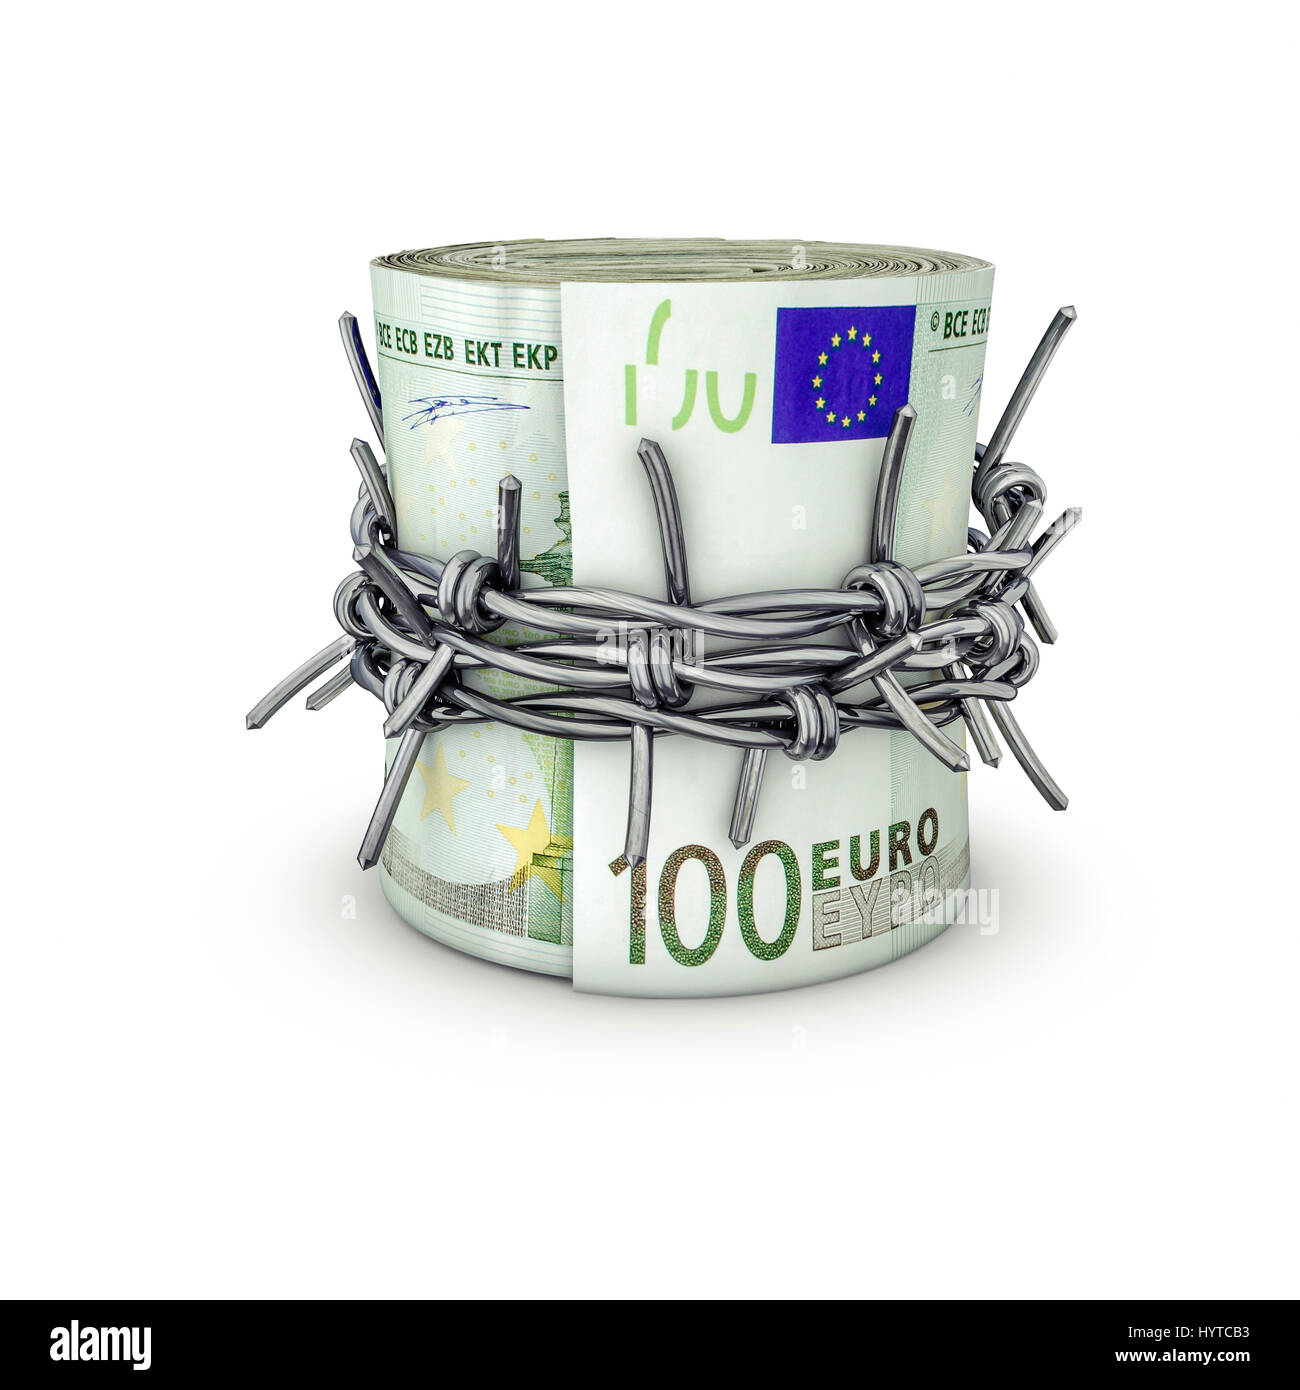 Forbidden money euros / 3D illustration of rolled up hundred euro notes tied with barbed wire Stock Photo